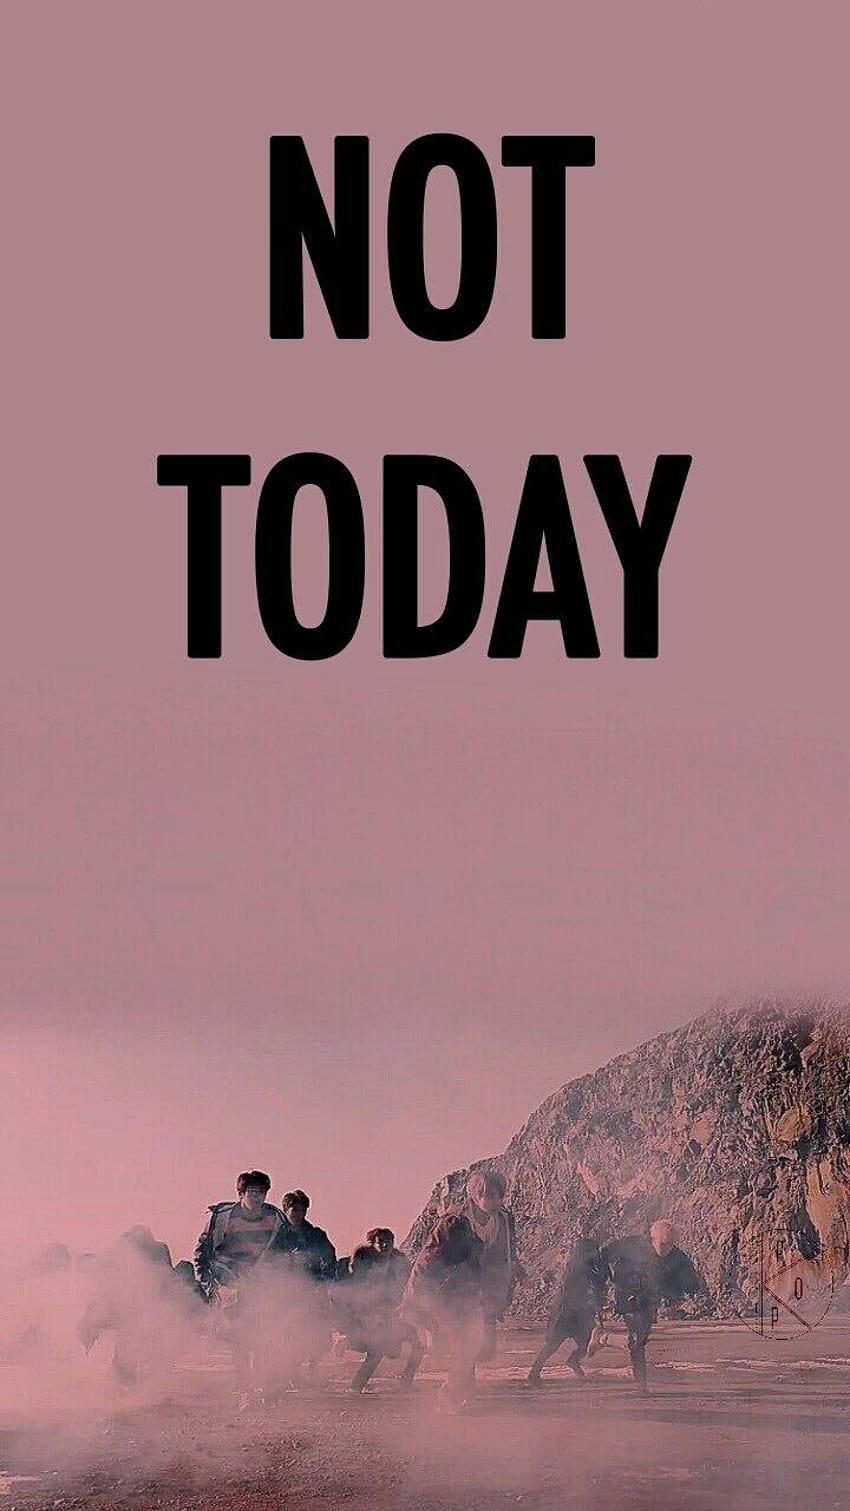 Not today shared by olgarasp, not today got HD phone wallpaper